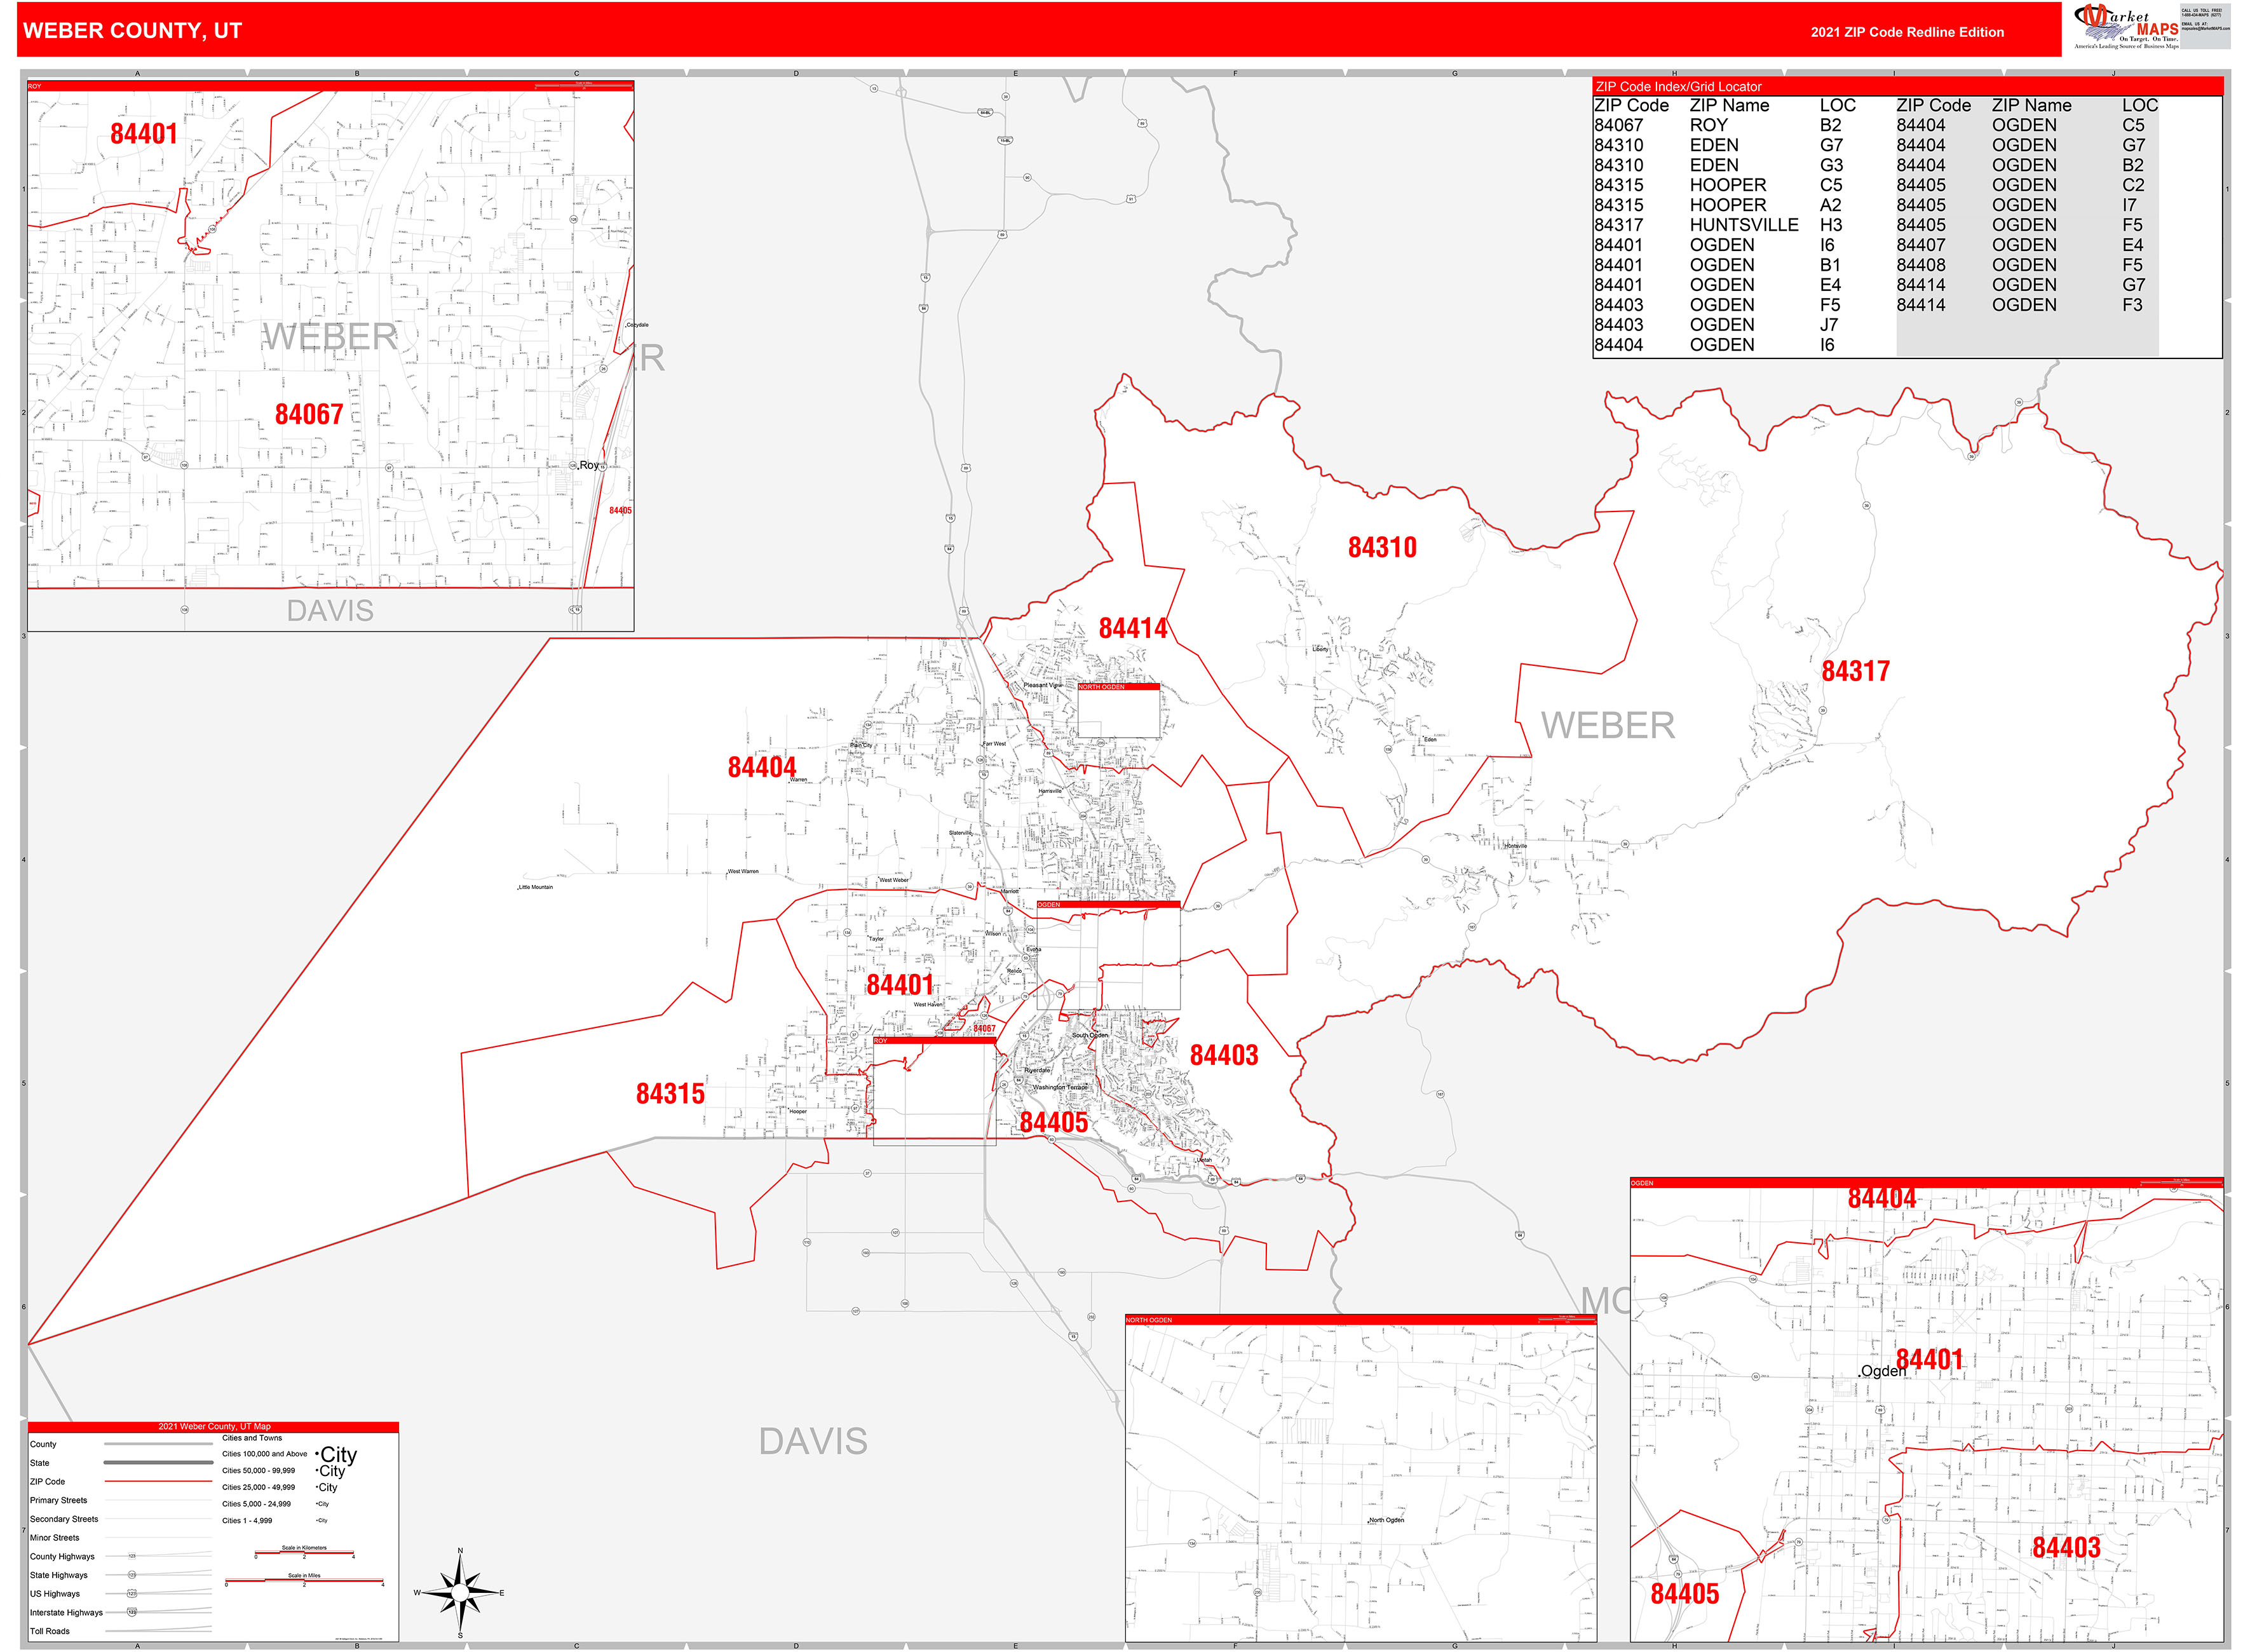 weber-county-ut-zip-code-wall-map-red-line-style-by-marketmaps